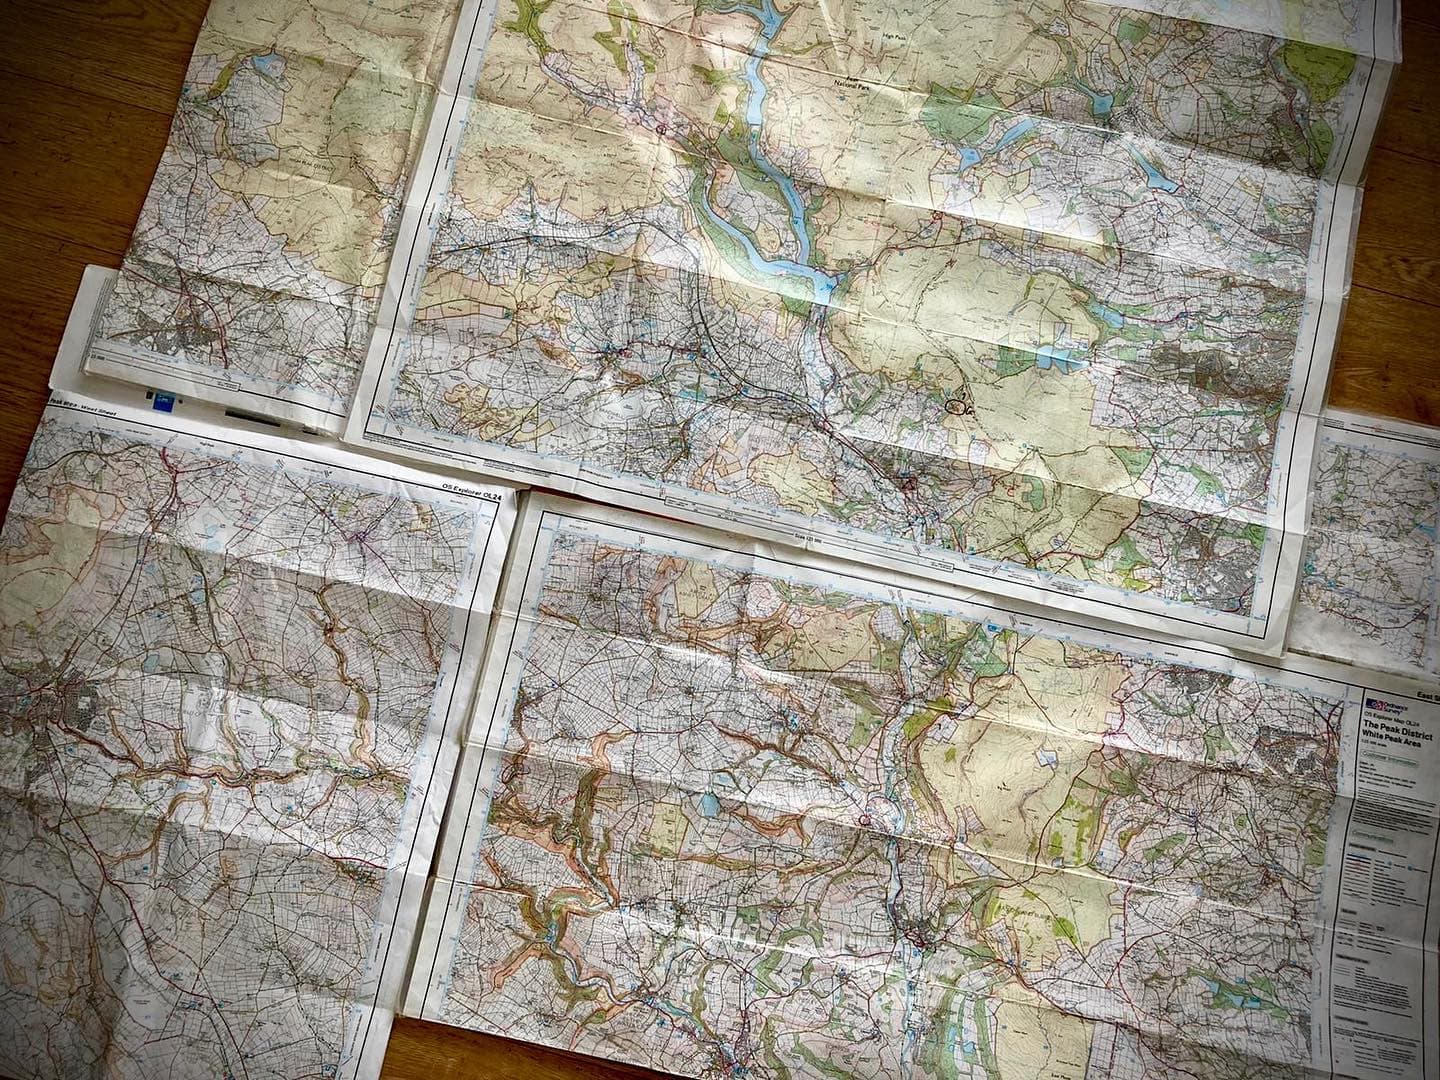 Anyone else’s floor look like this when they’re planning routes?? 

GPX waypoint files showing ch...